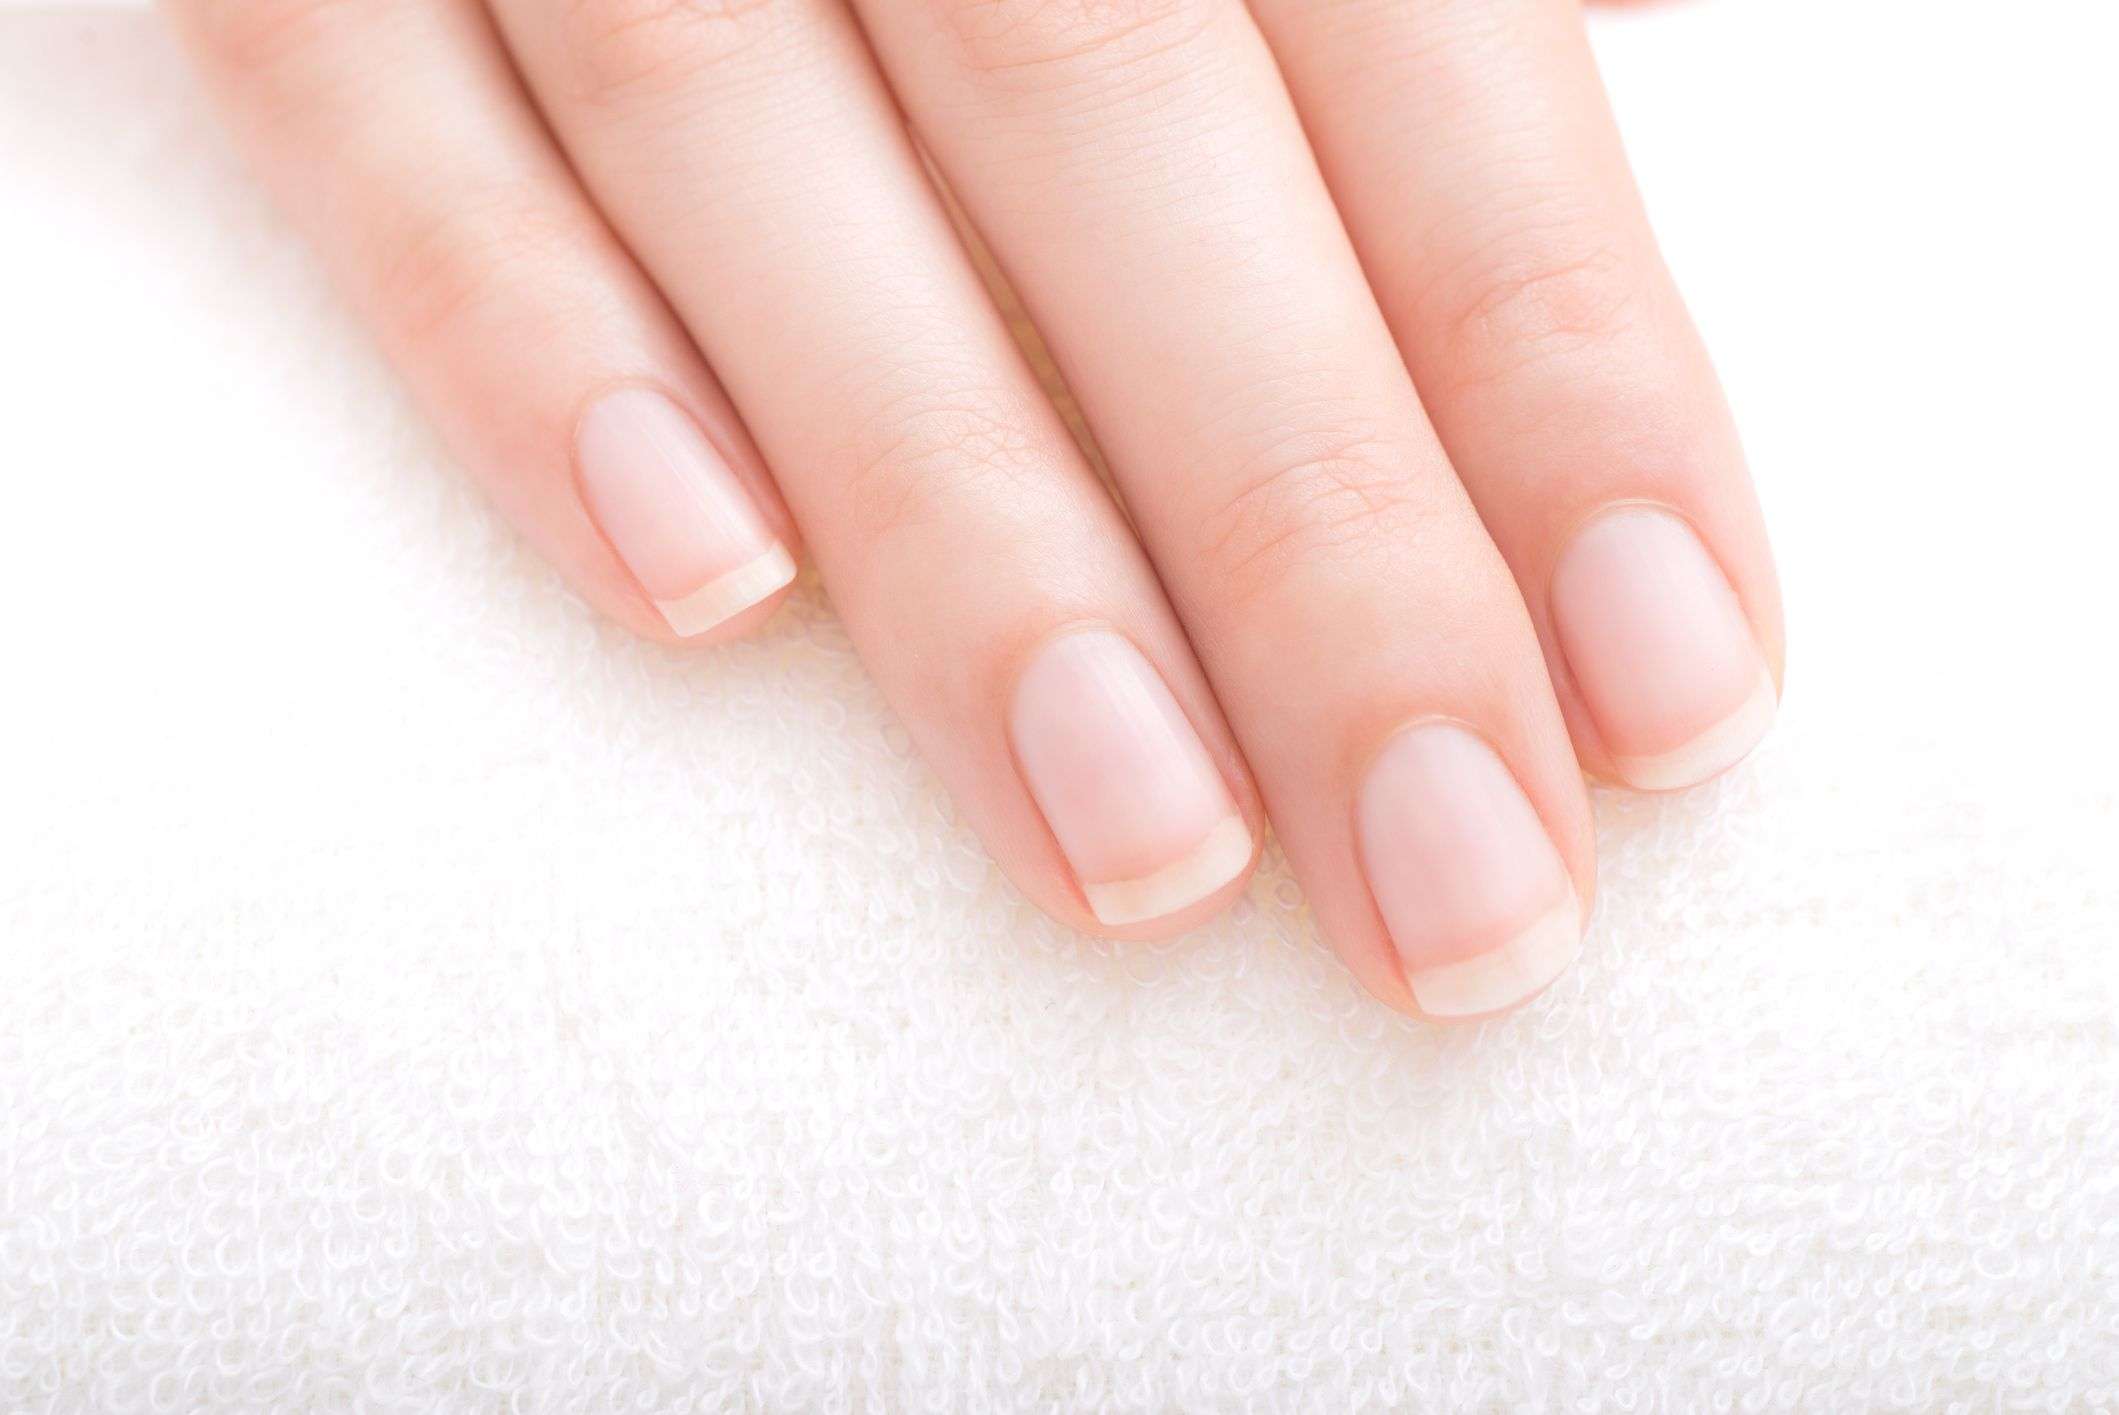 How To Make Nails Stronger And Thicker At Home?